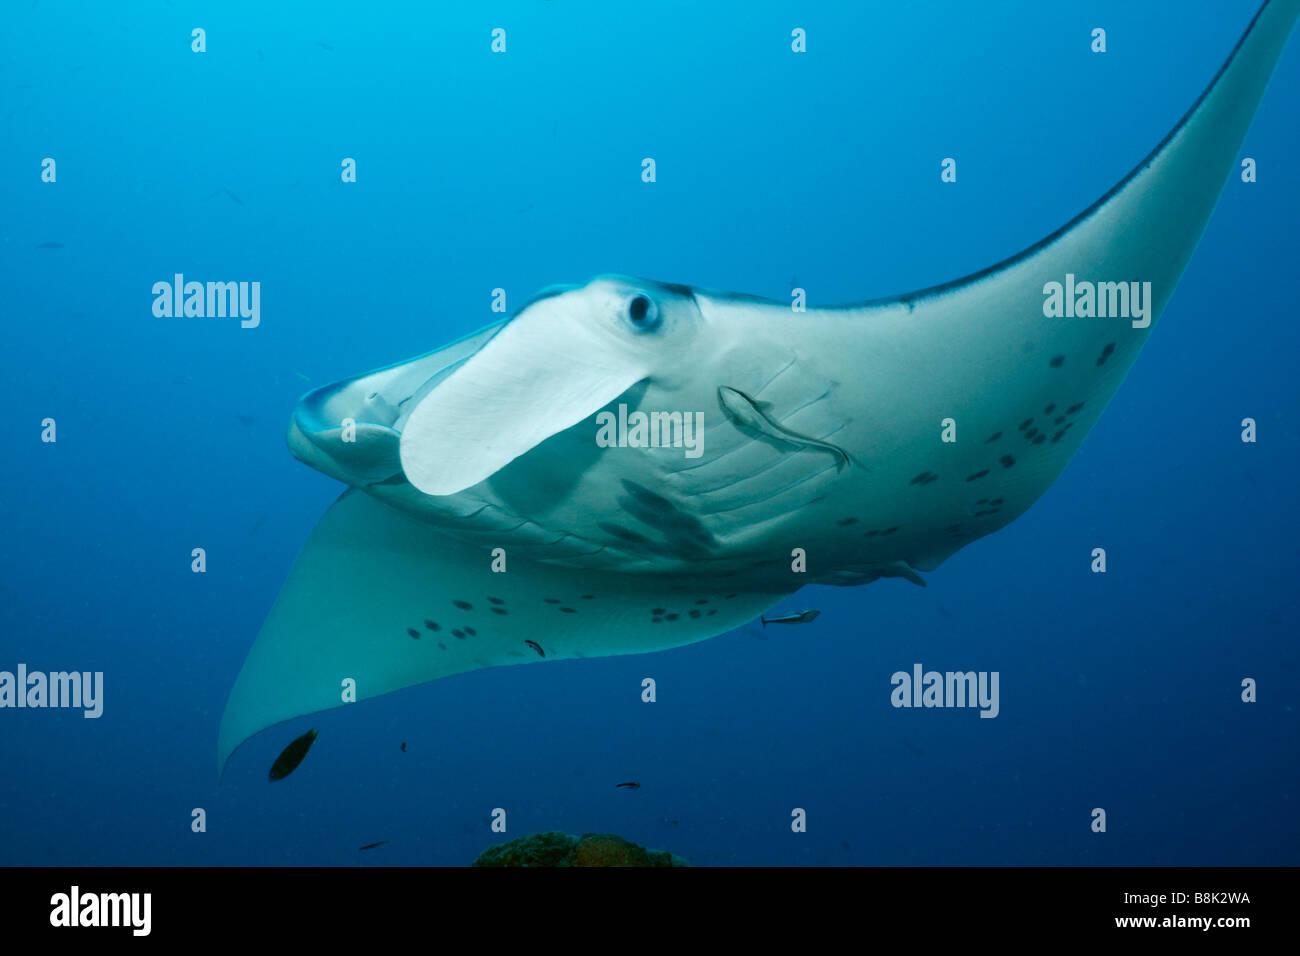 Manta ray swimming through the blue ocean water lit by the sun Stock Photo